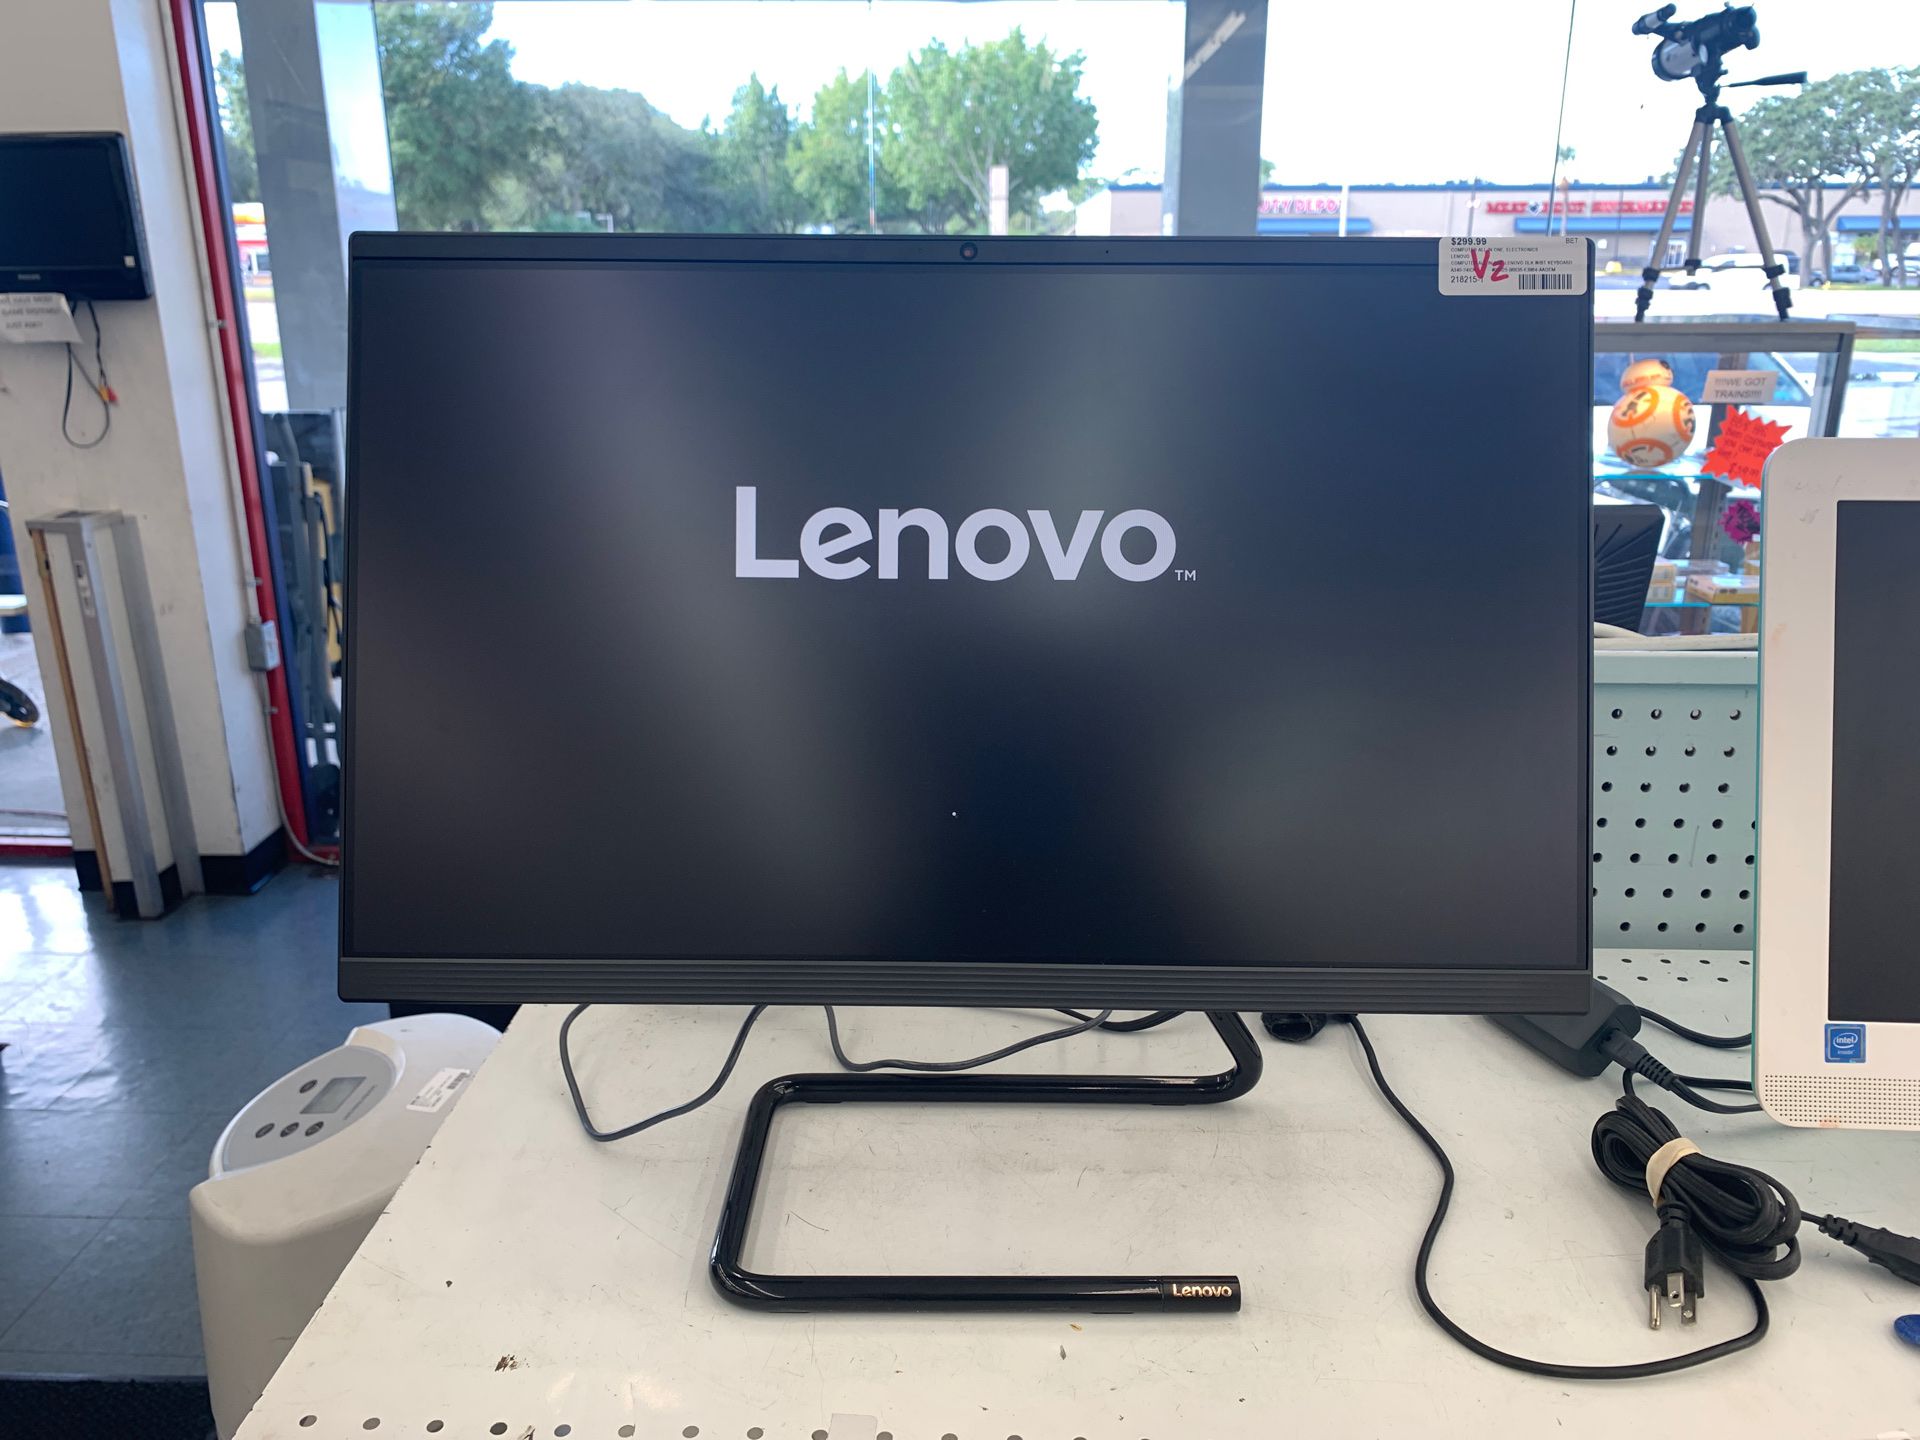 All in one Lenovo computer